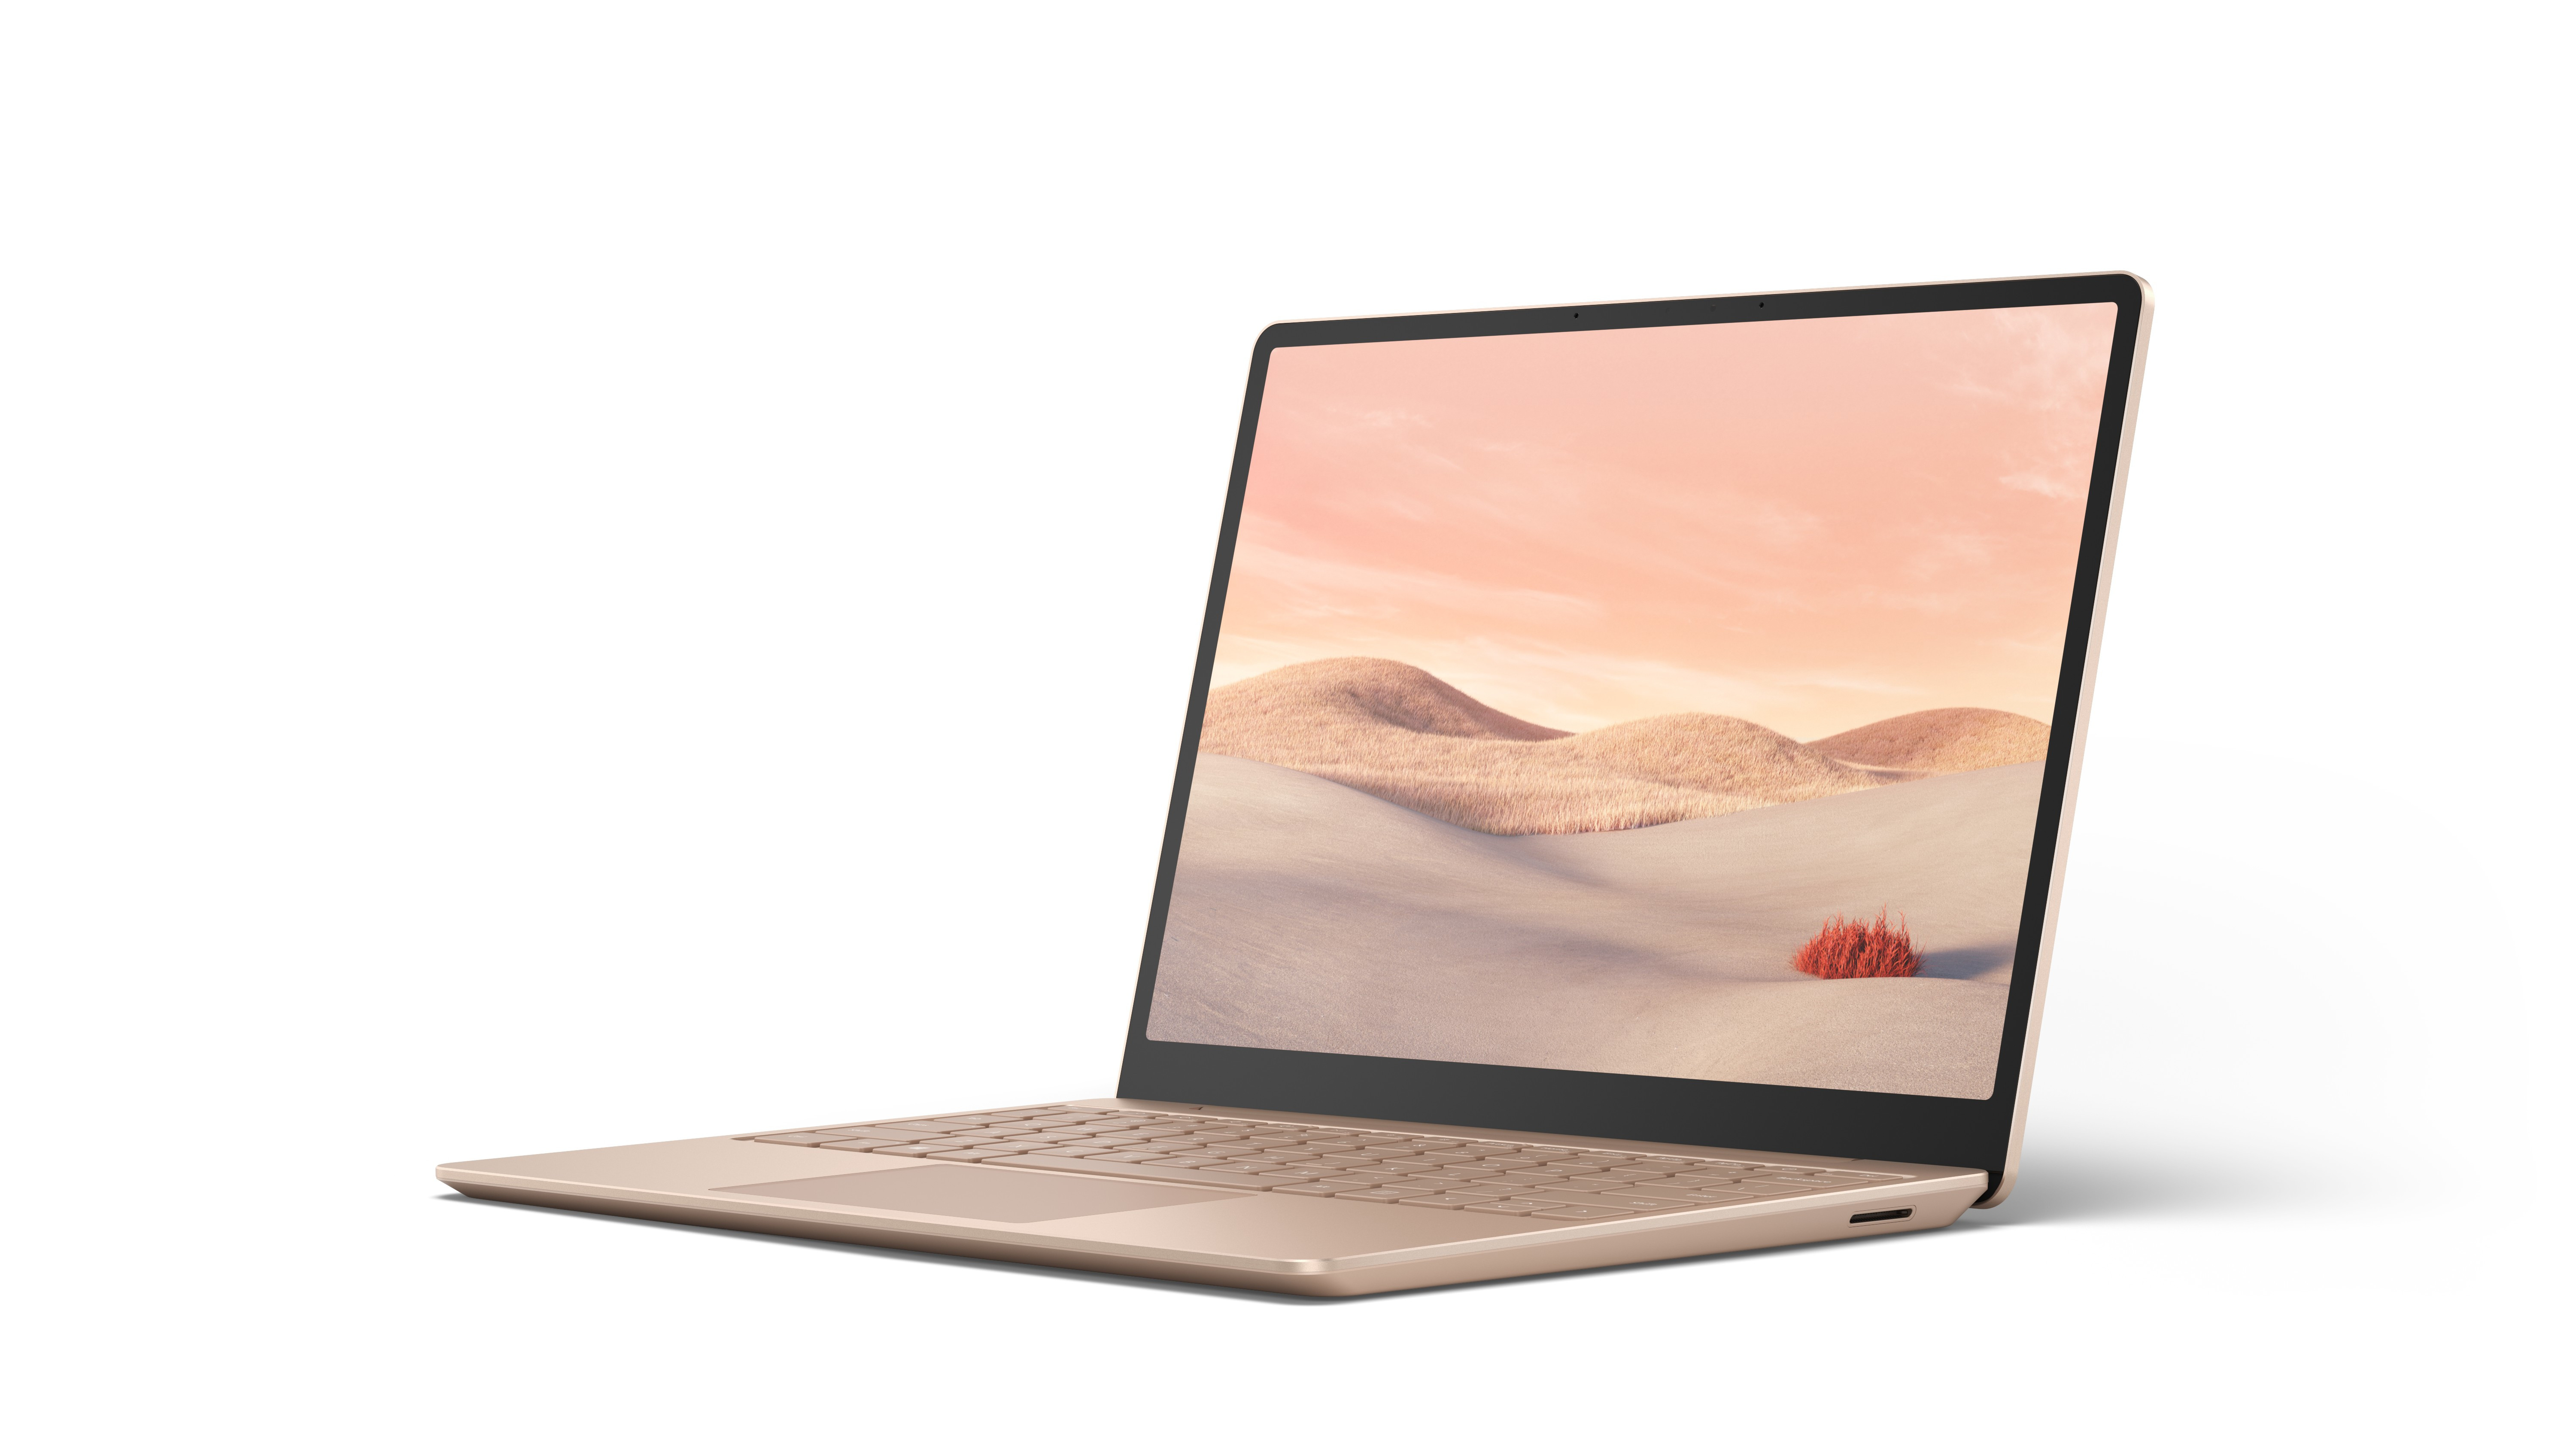 Microsoft Surface Laptop Go i5-1035G1 8GB 128SSD 12.4 Touch W10 Home S Sandstone